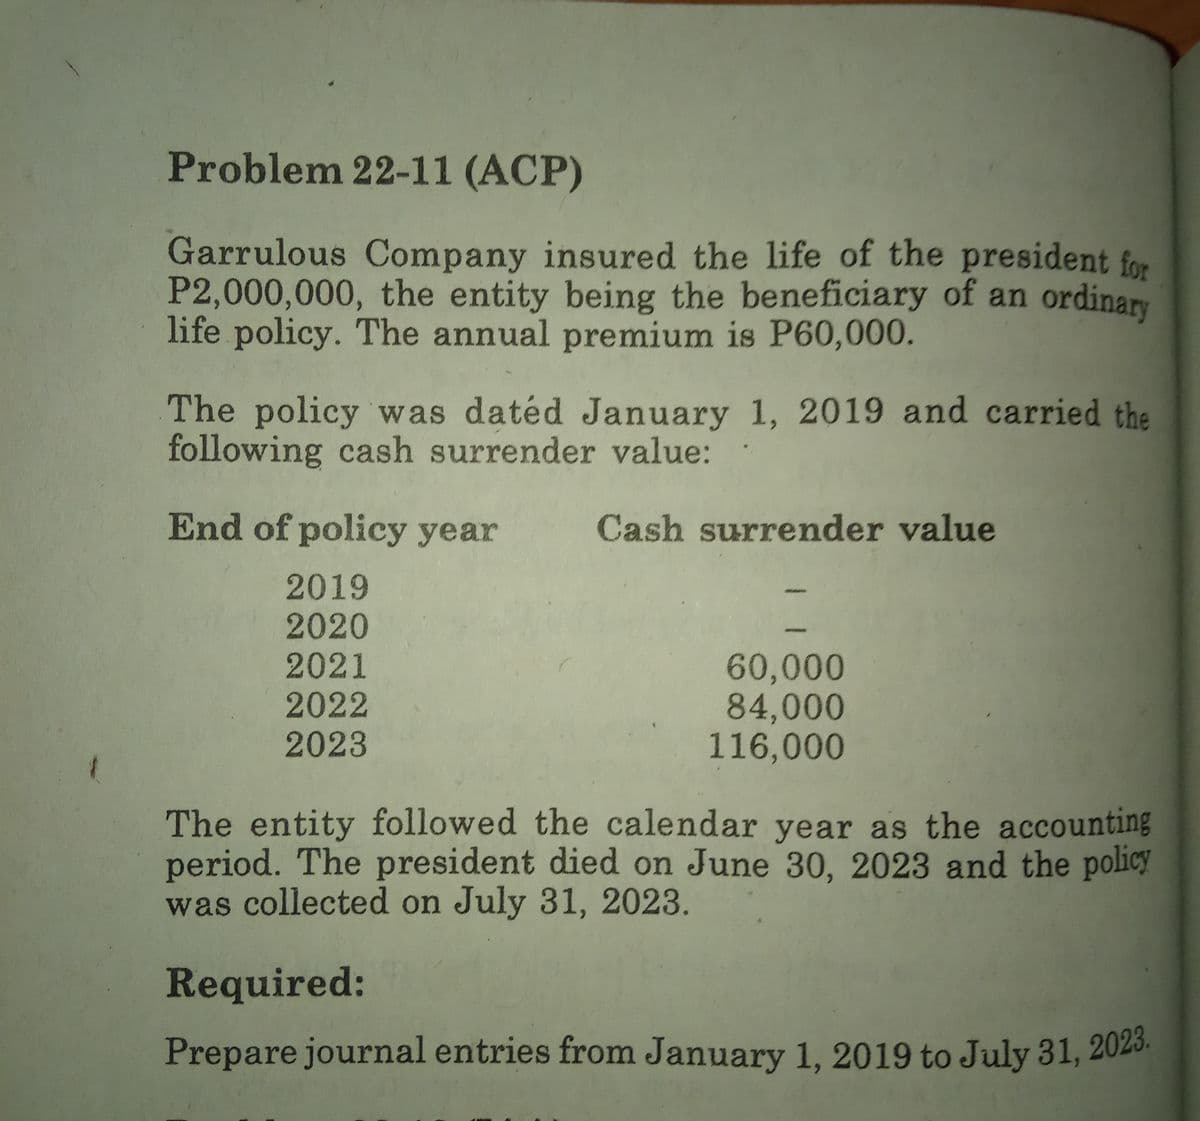 Prepare journal entries from January 1, 2019 to July 31, 2023.
Problem 22-11 (ACP)
Garrulous Company insured the life of the president for
P2,000,000, the entity being the beneficiary of an ordinary
life policy. The annual premium is P60,000.
The policy was datéd January 1, 2019 and carried the
following cash surrender value:
End of policy year
Cash surrender value
2019
2020
2021
2022
2023
60,000
84,000
116,000
The entity followed the calendar year as the accounting
period. The president died on June 30, 2023 and the policy
was collected on July 31, 2023.
Required:
Prepare journal entries from January 1, 2019 to July 31, 2023.
